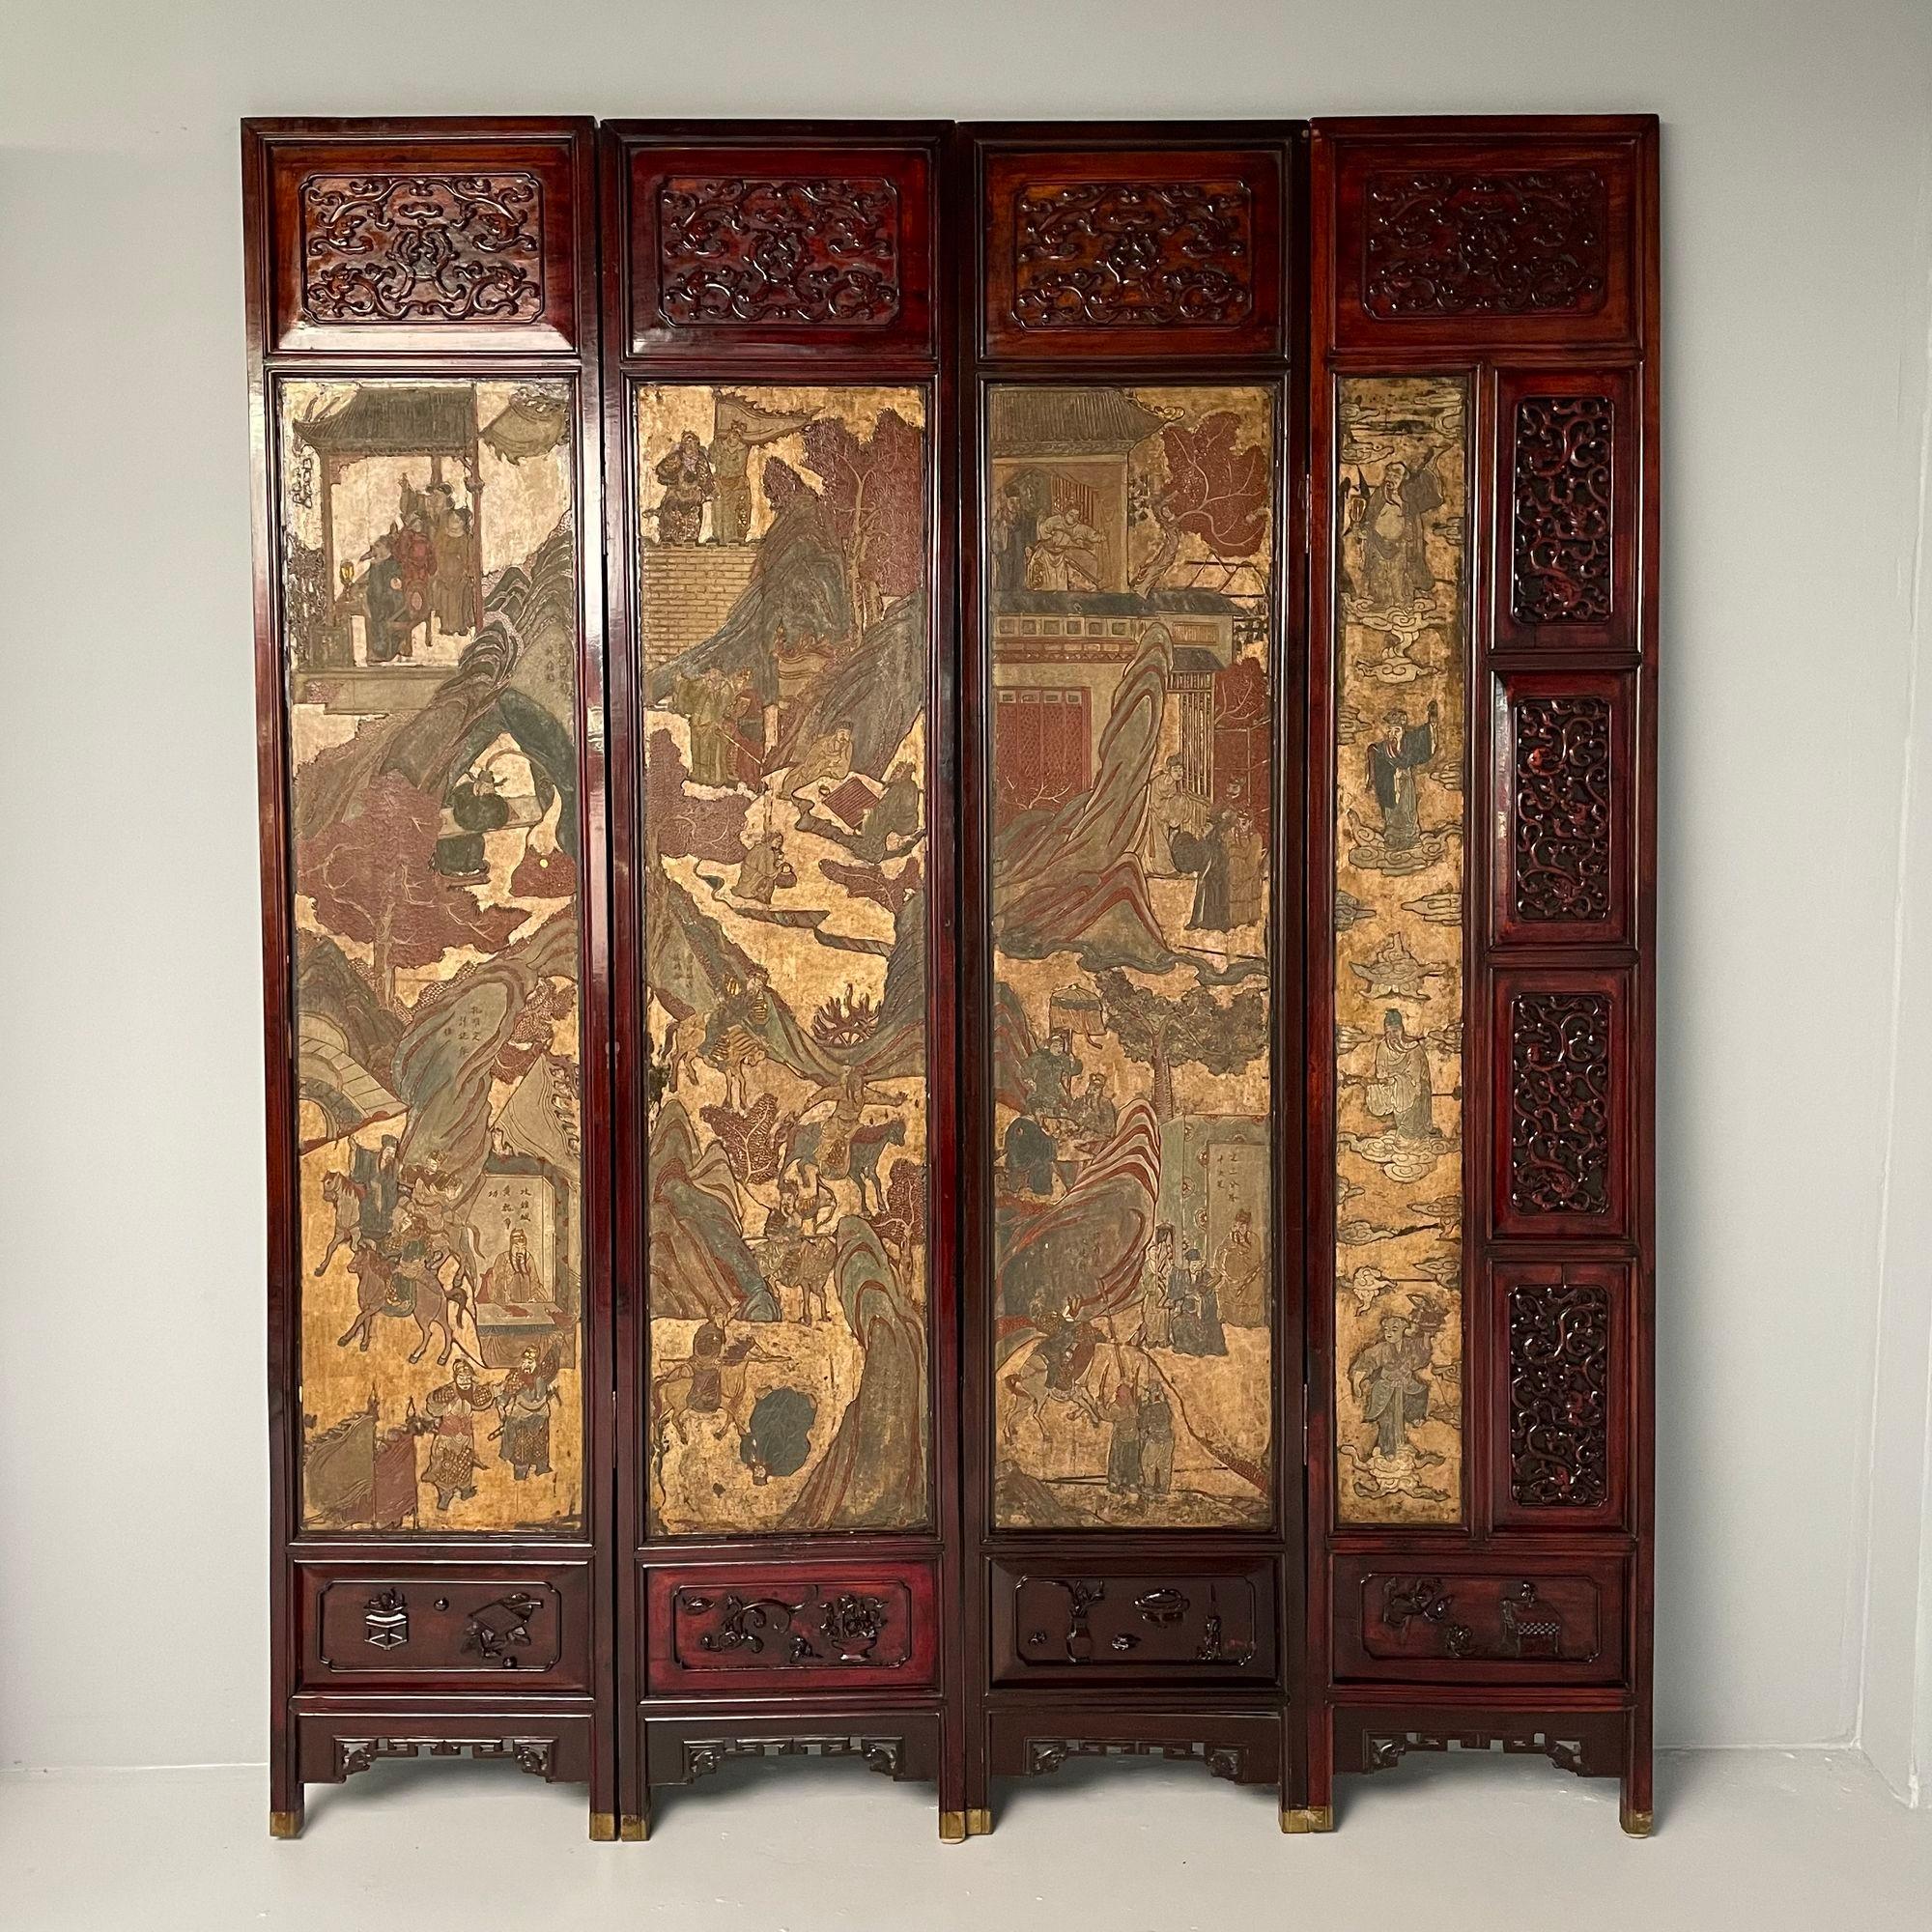 Unusual Eight Panel Chinese Coromandel Screen circa 1700-1800 with Carved Frame In Good Condition For Sale In Stamford, CT